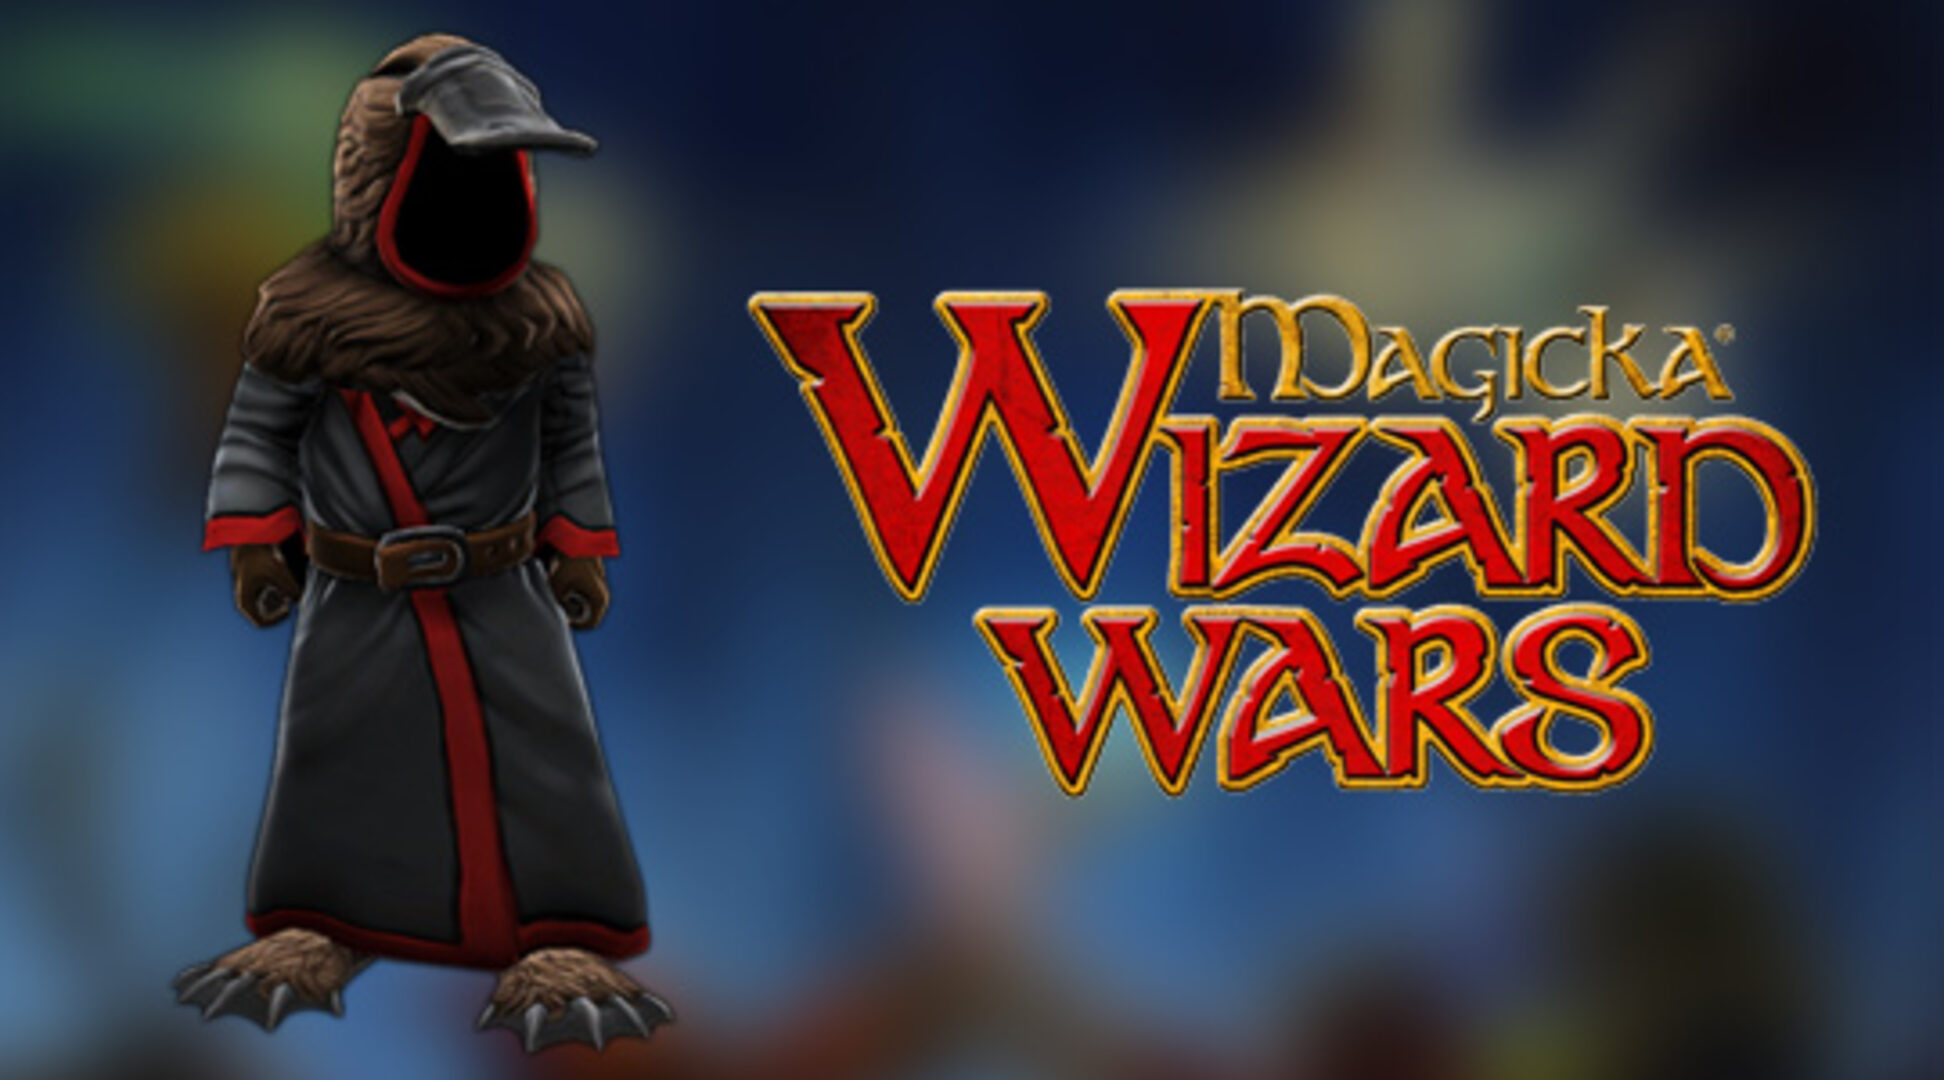 Magicka wizards of the square tablet steam фото 103